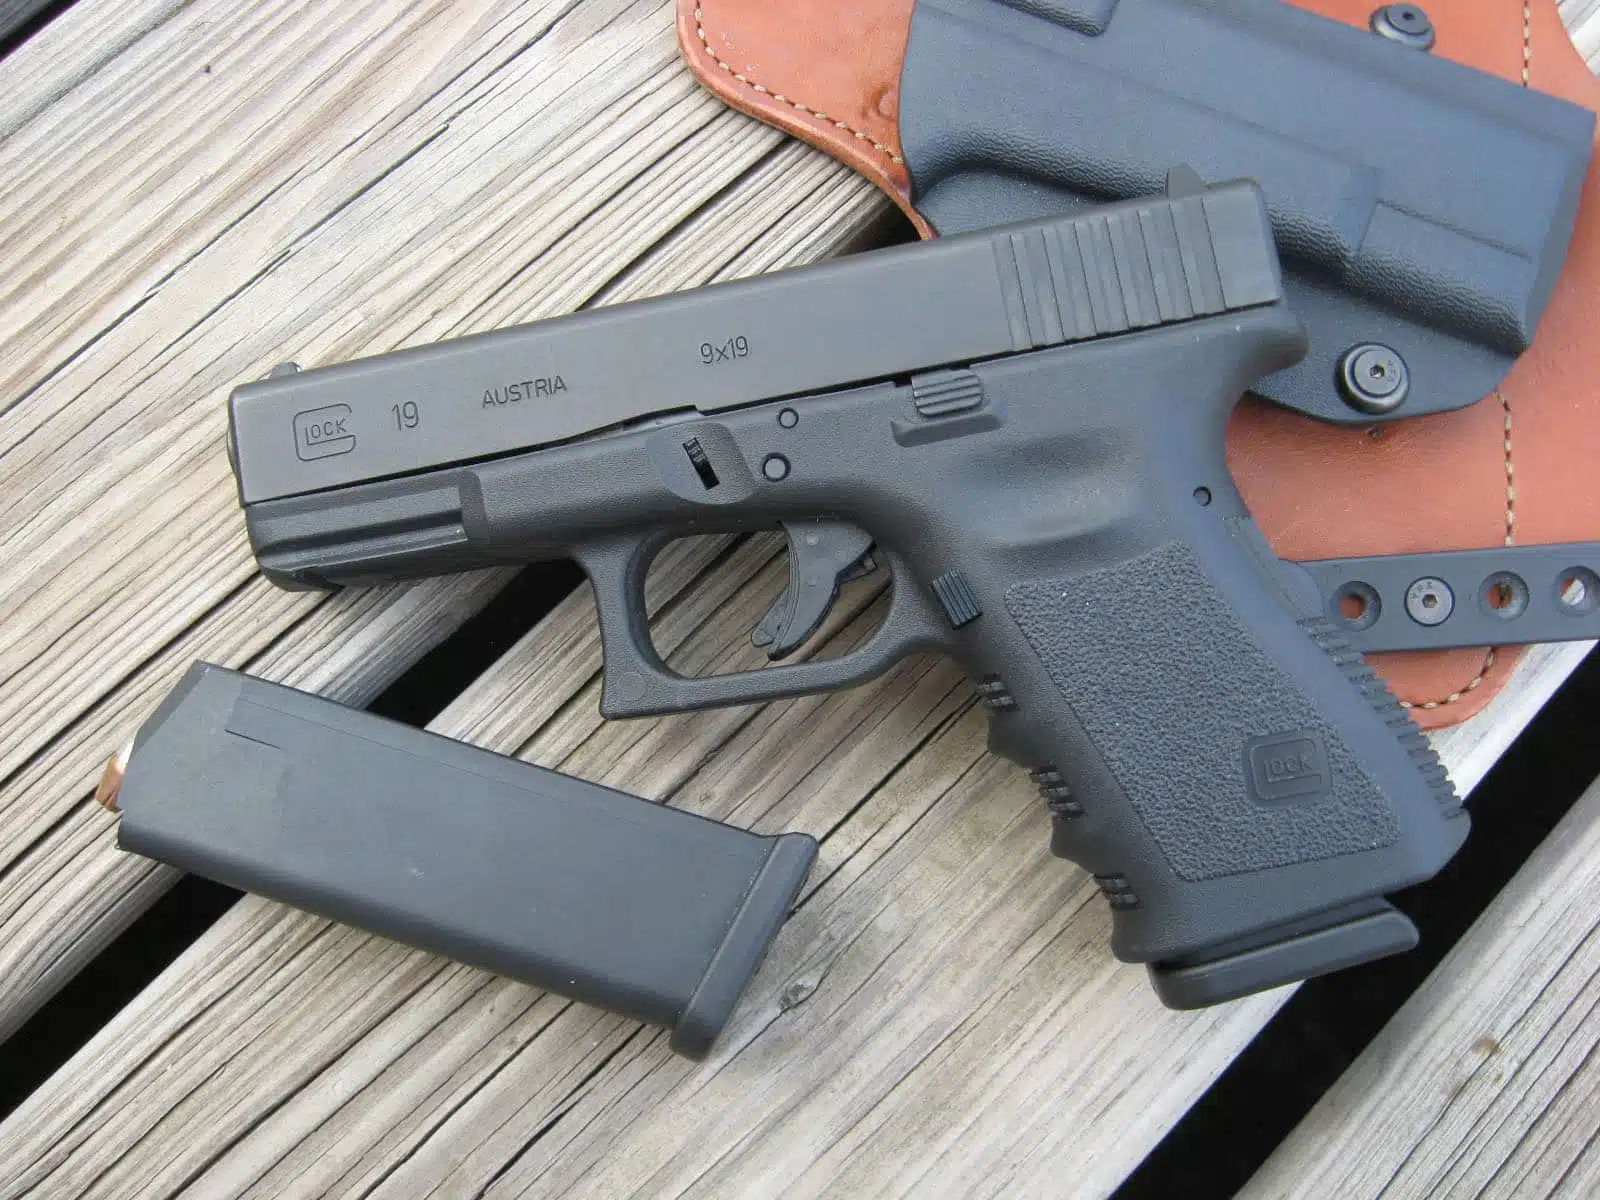 Glock 19 with holster